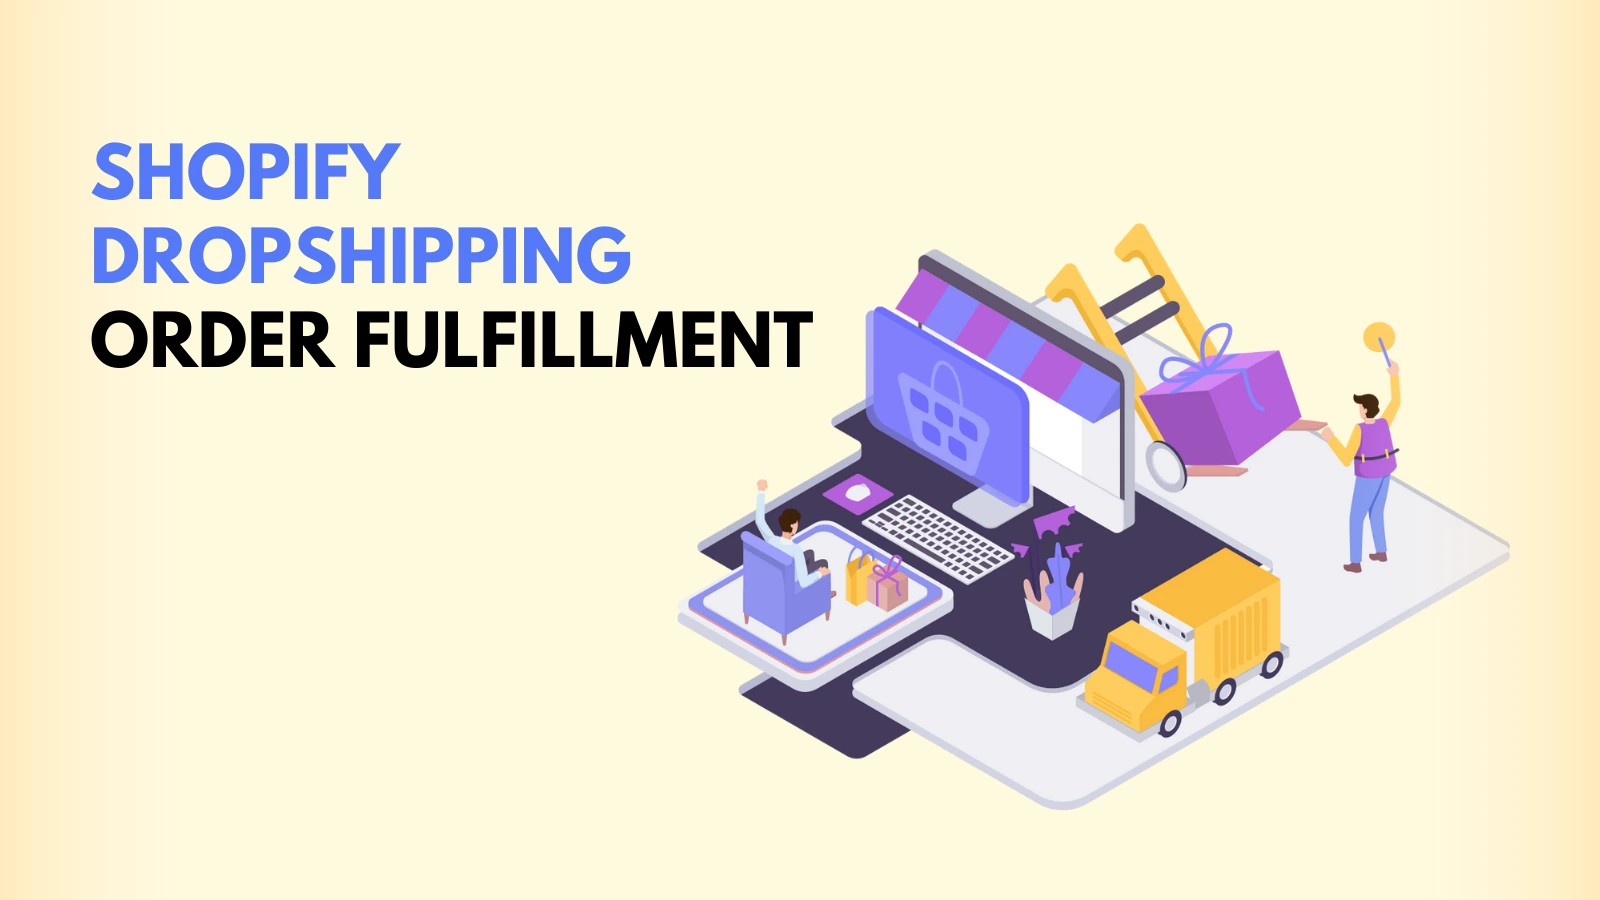 How to Fulfill Dropship Orders on Shopify